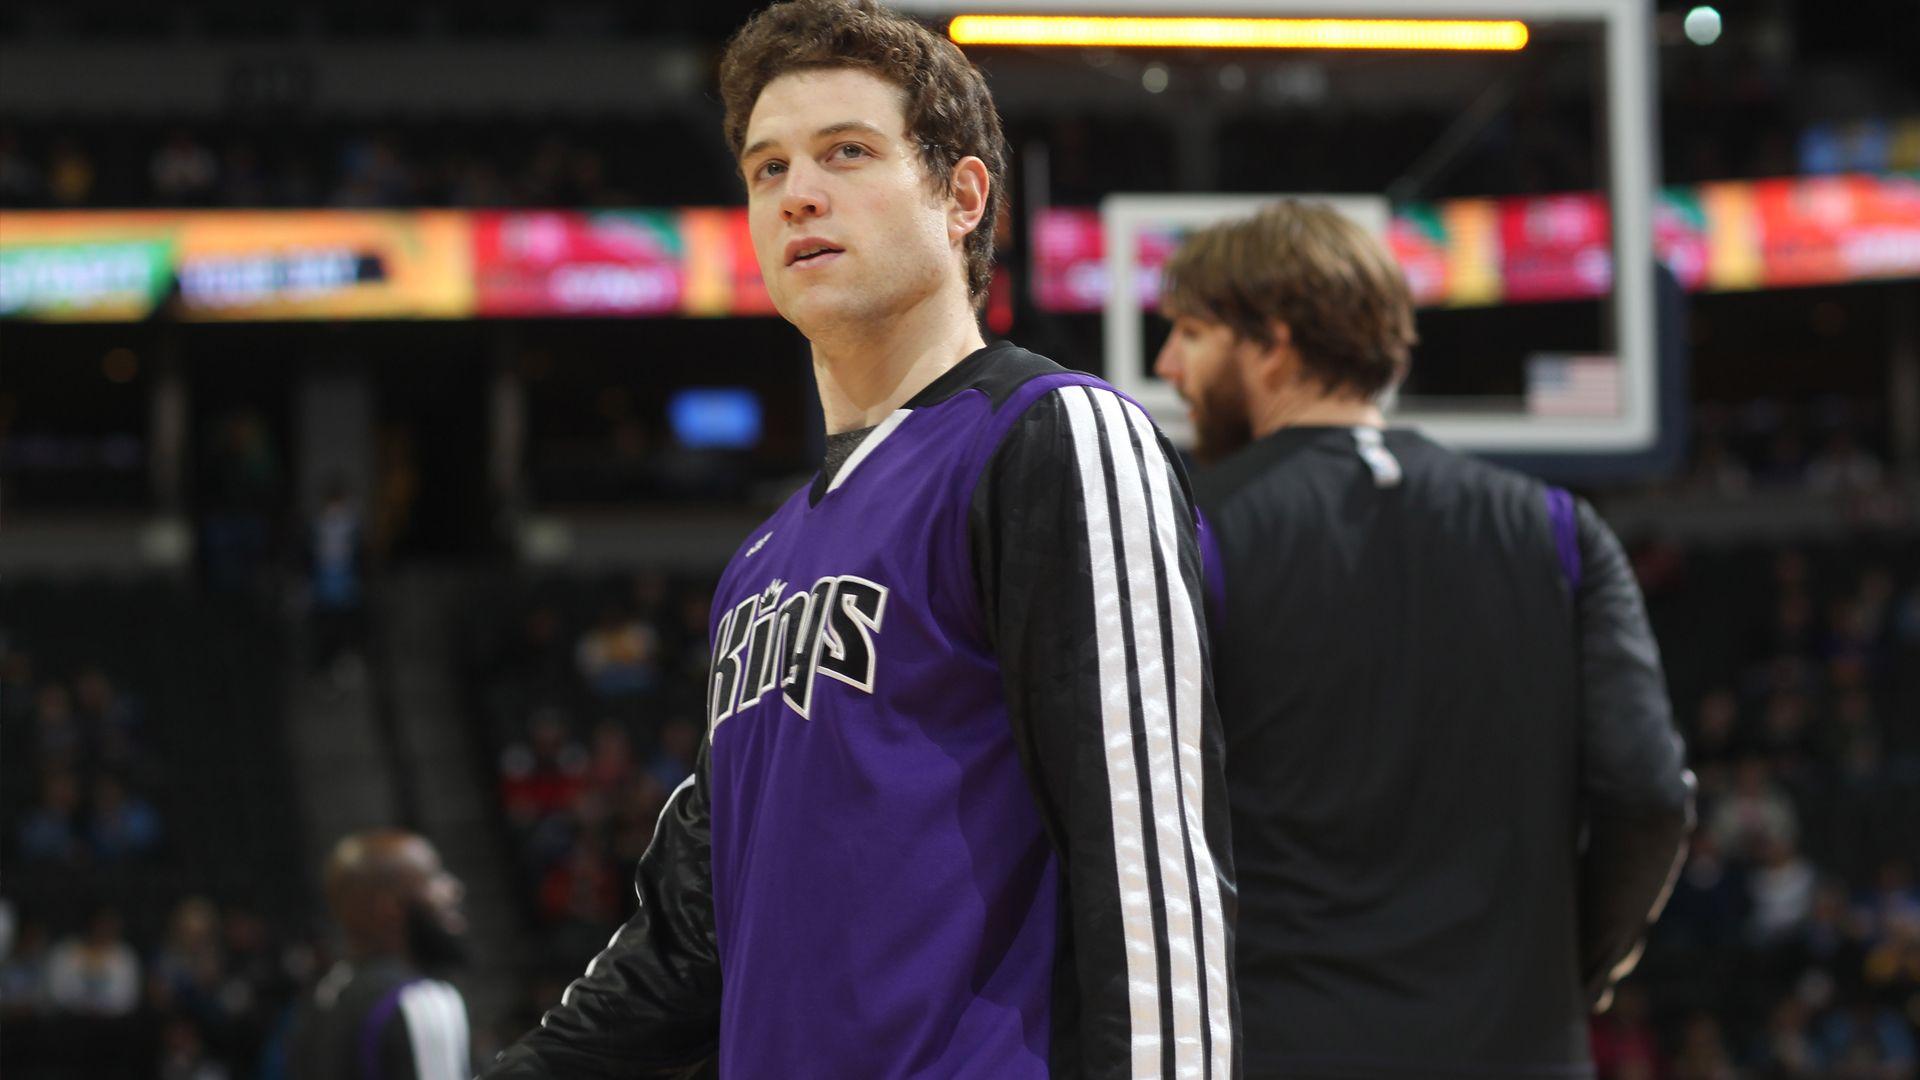 Jimmer Fredette returns to NBA just in time to face his former Kings